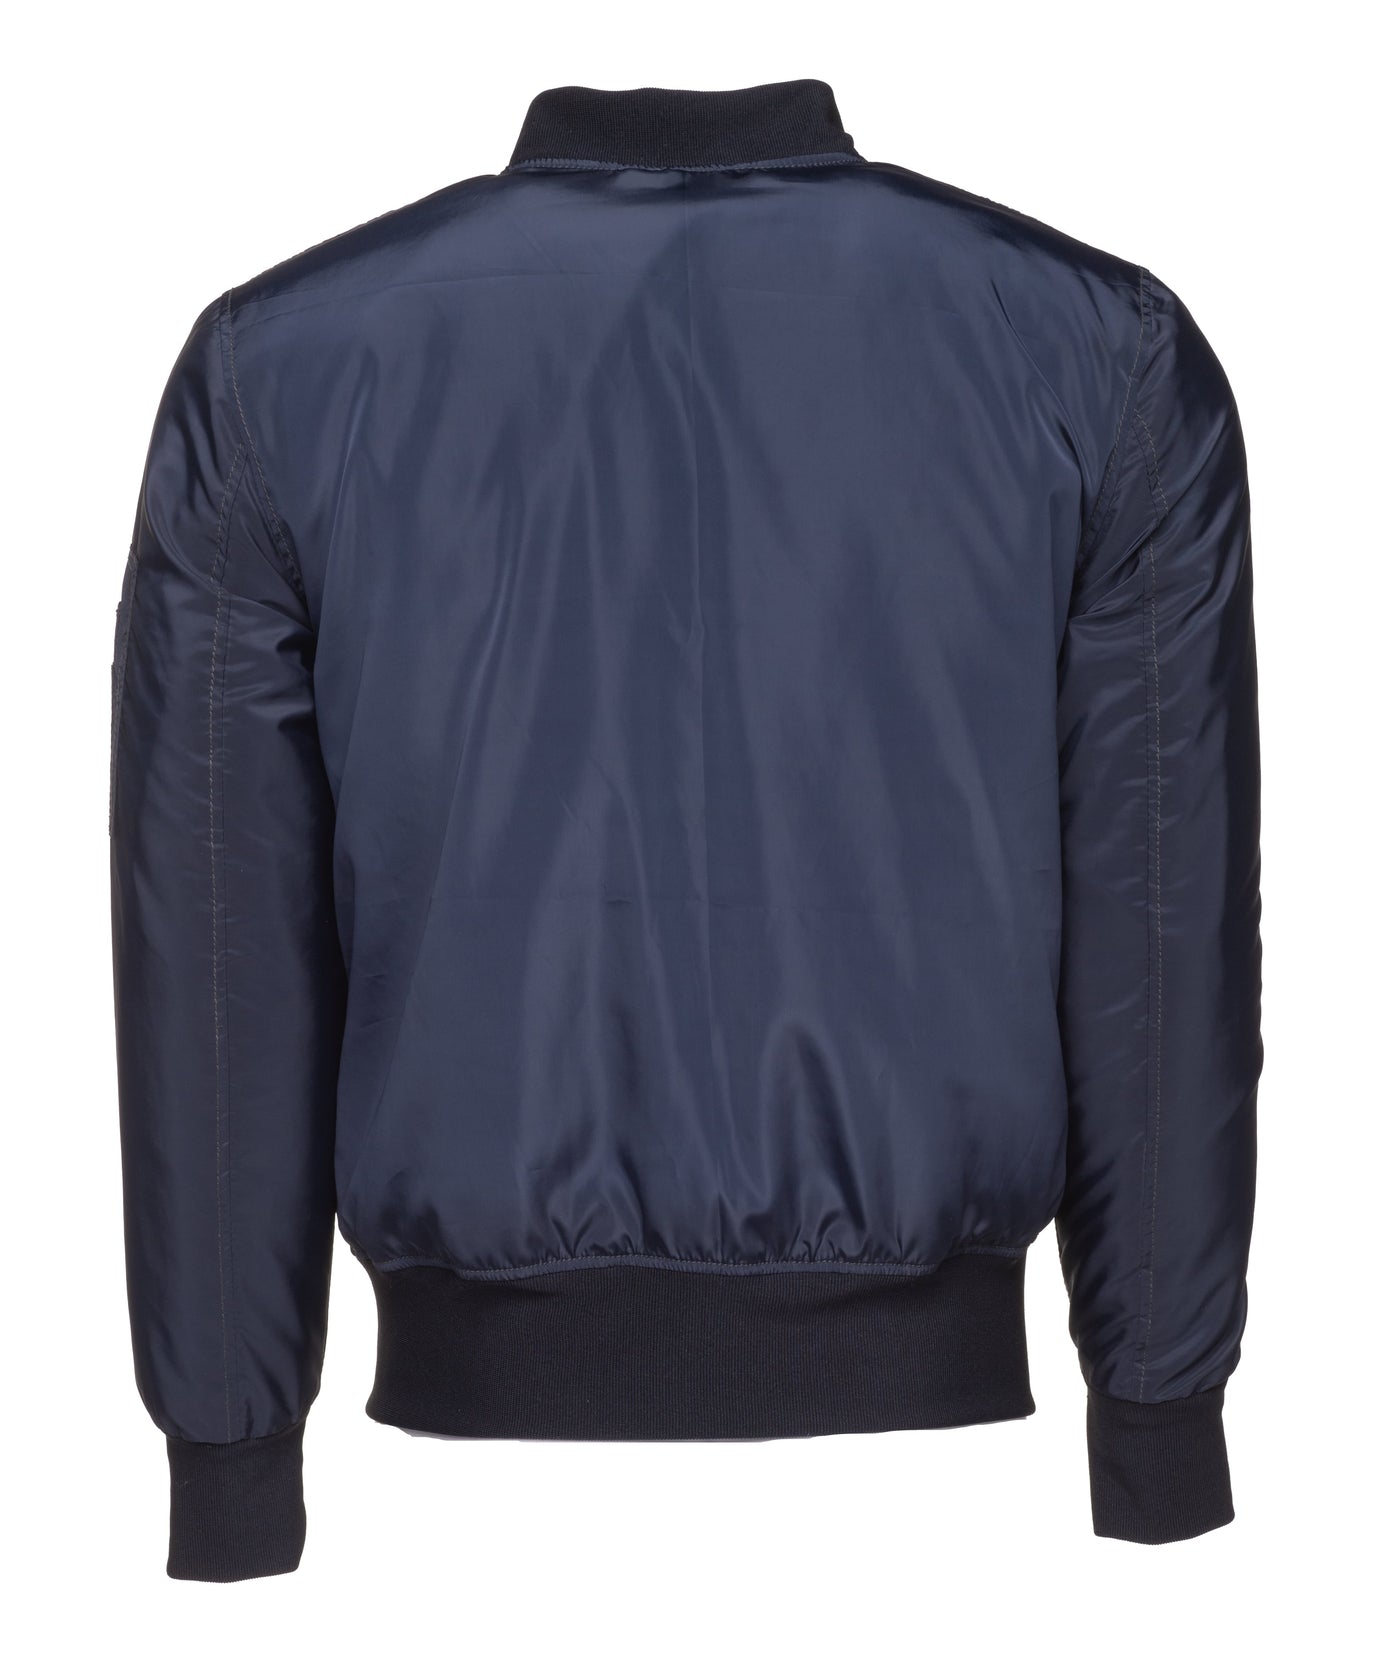 Flying Jacket with Ribbed Waist for Men Zak